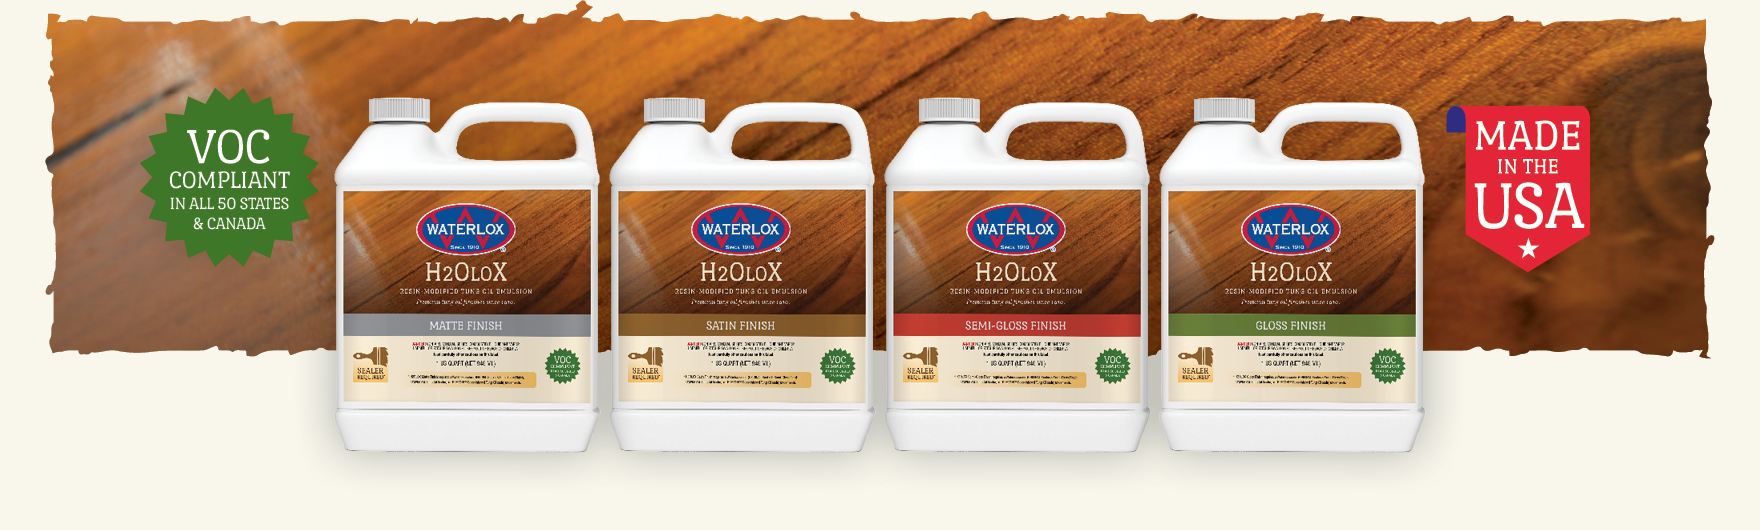 H2OLOX® Product Family